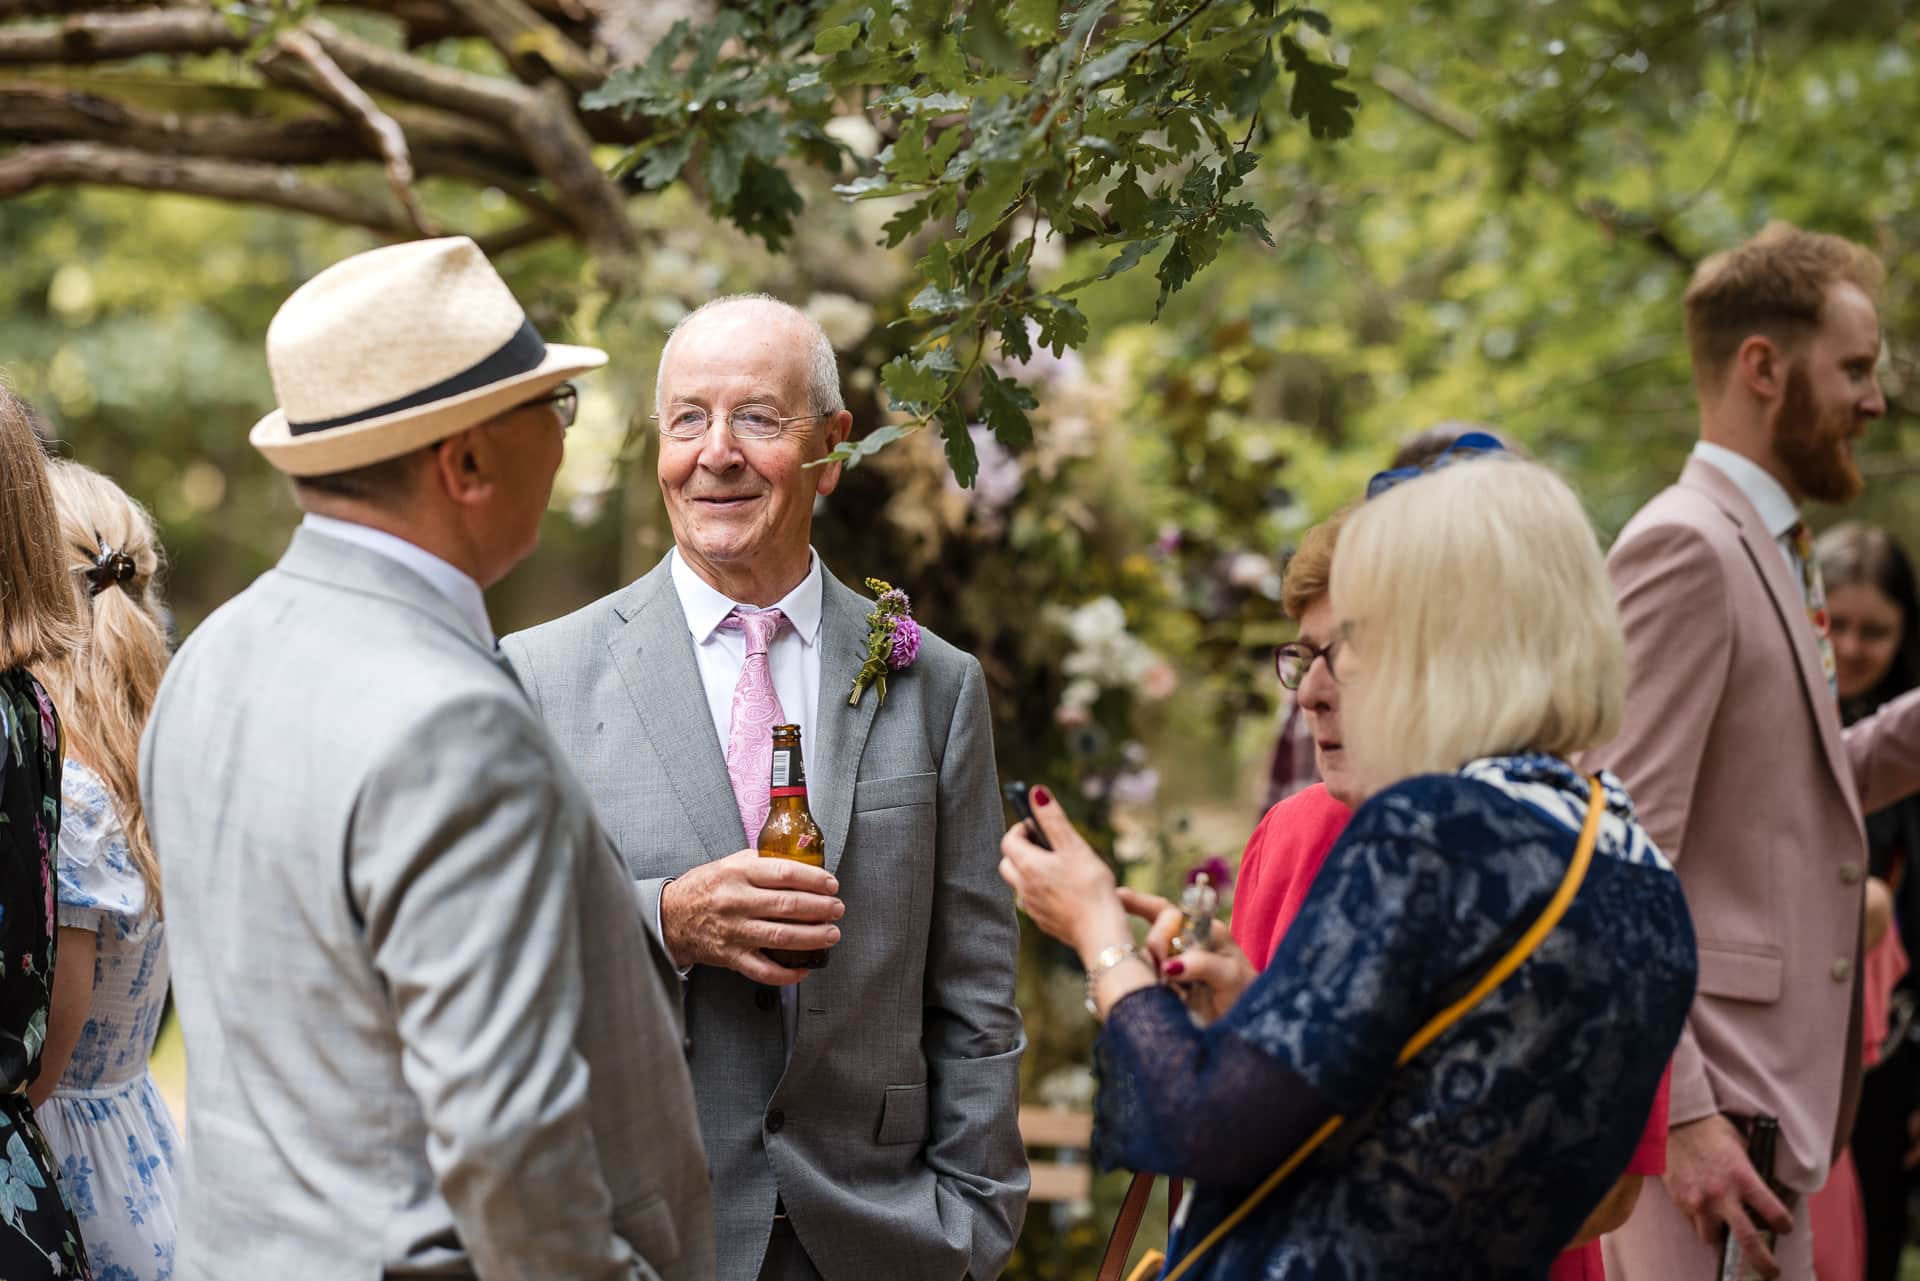 Talking under and oak tree at the Endeavour Woodland wedding venue